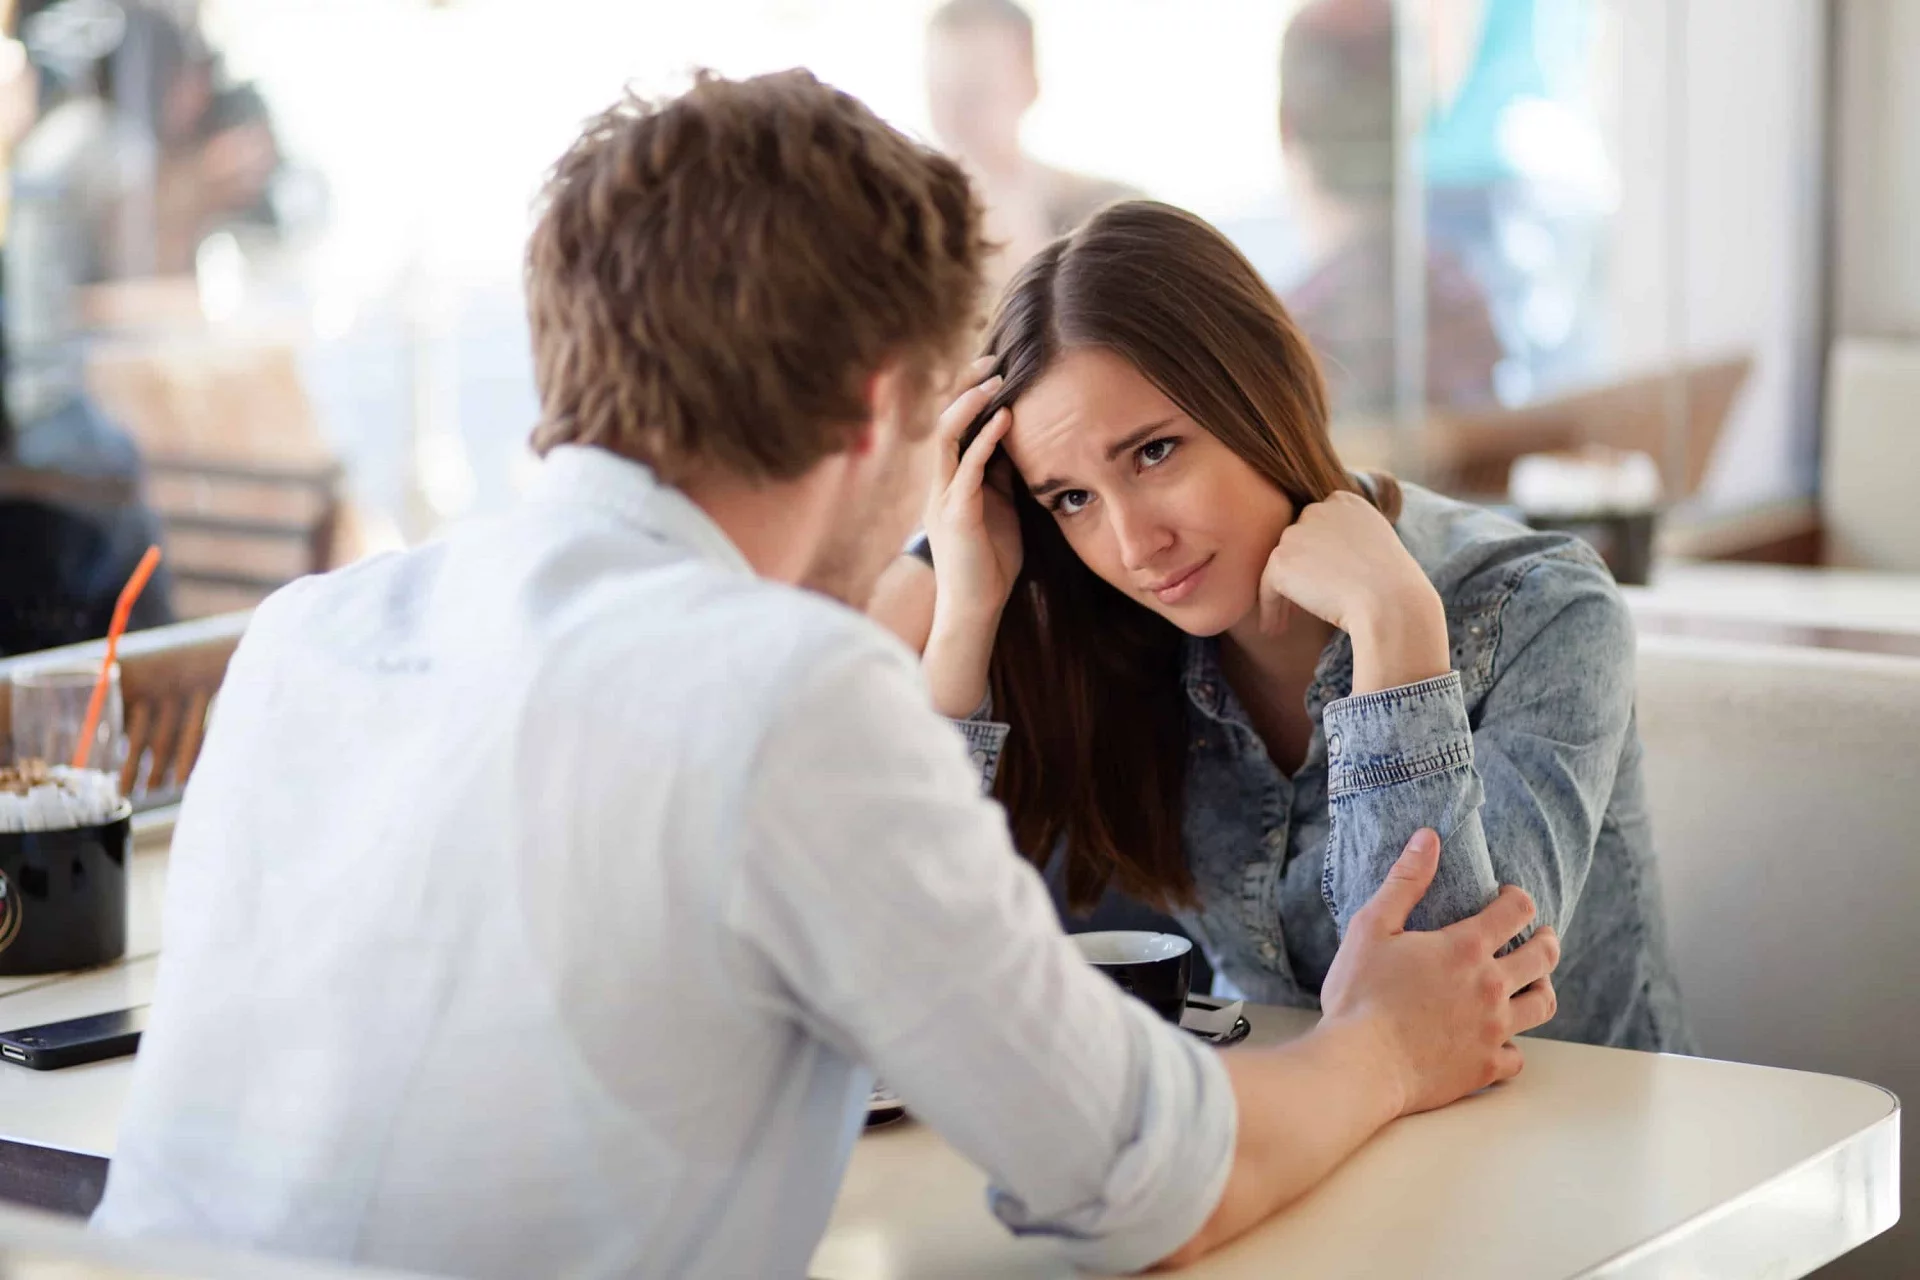 7 Ways to Deal with a Guy who Annoys You